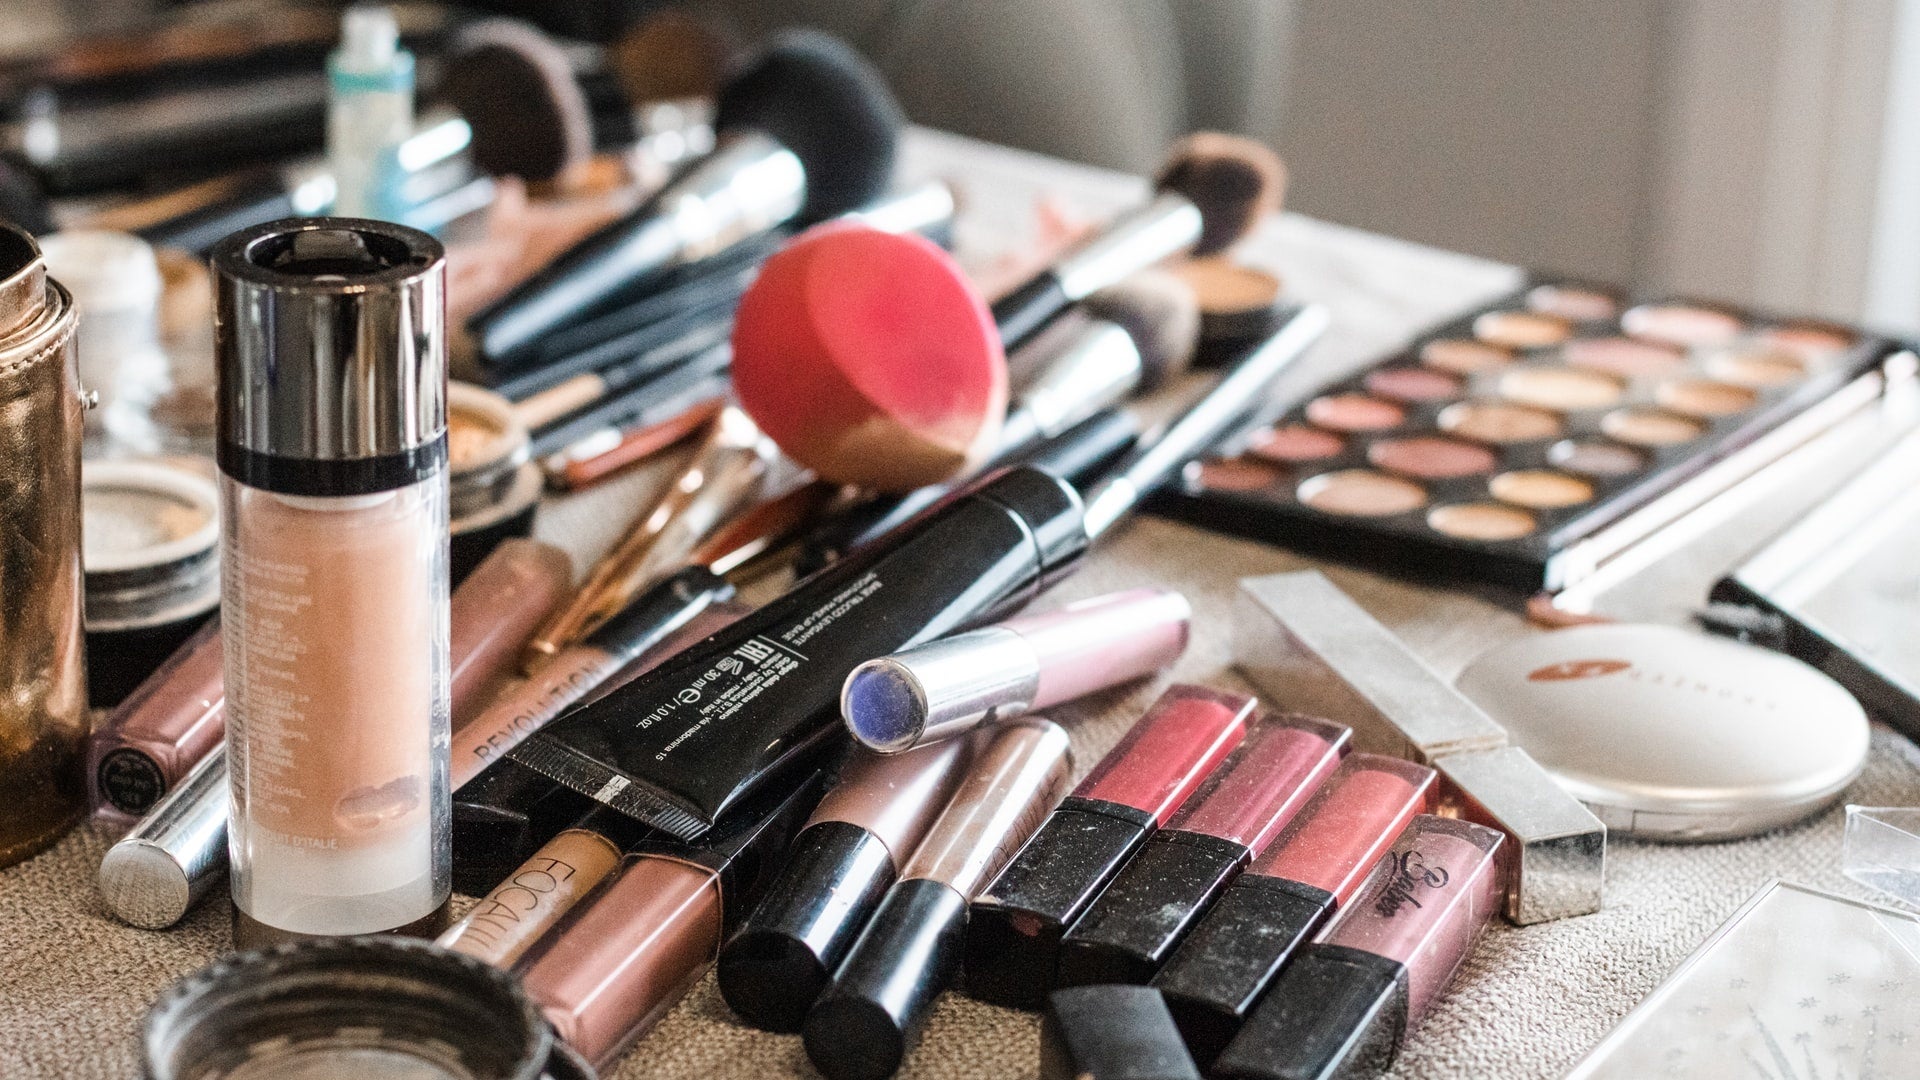 Clutter Off Your Beauty Counter